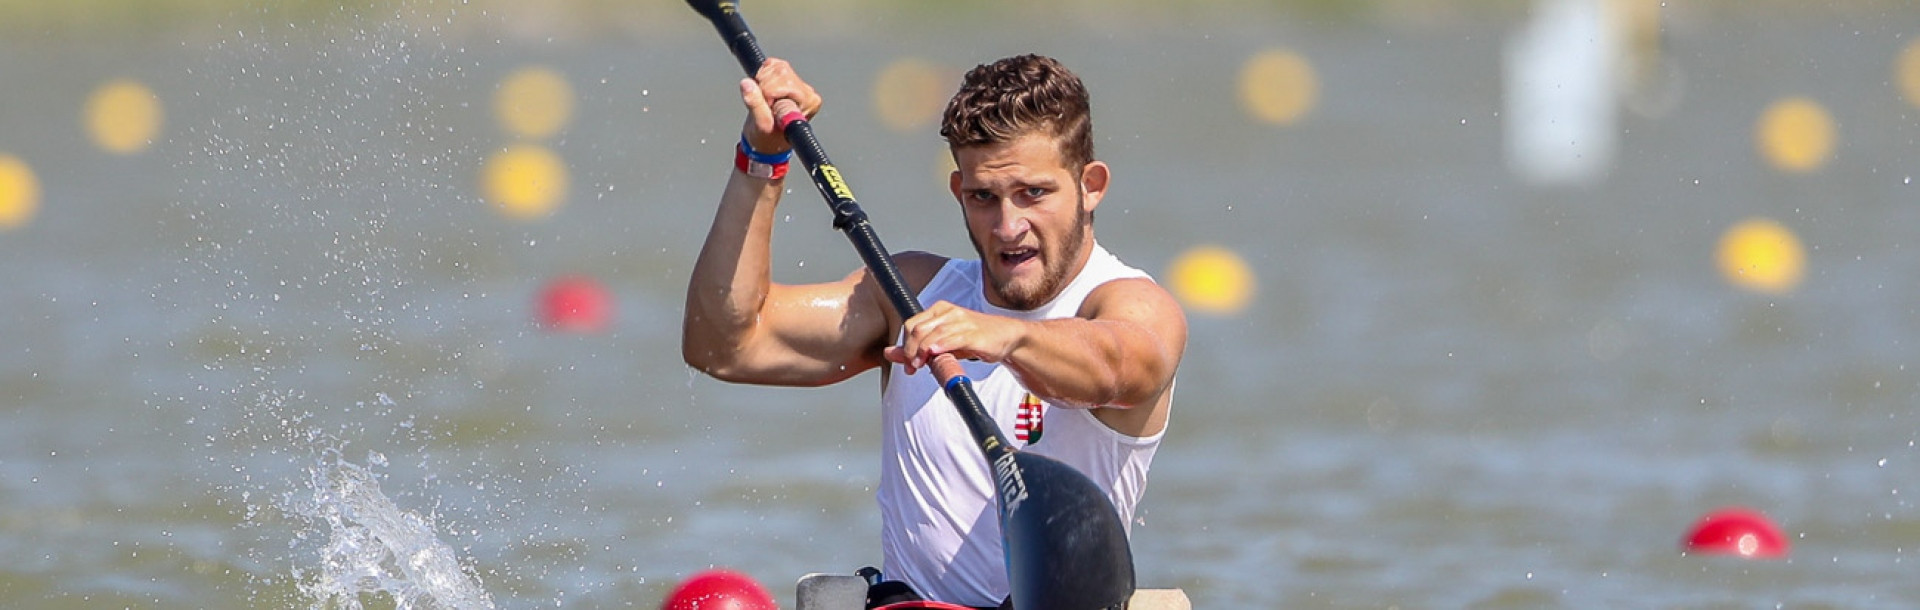 Hungary's Kiss set for home return at ICF Paracanoe World Cup